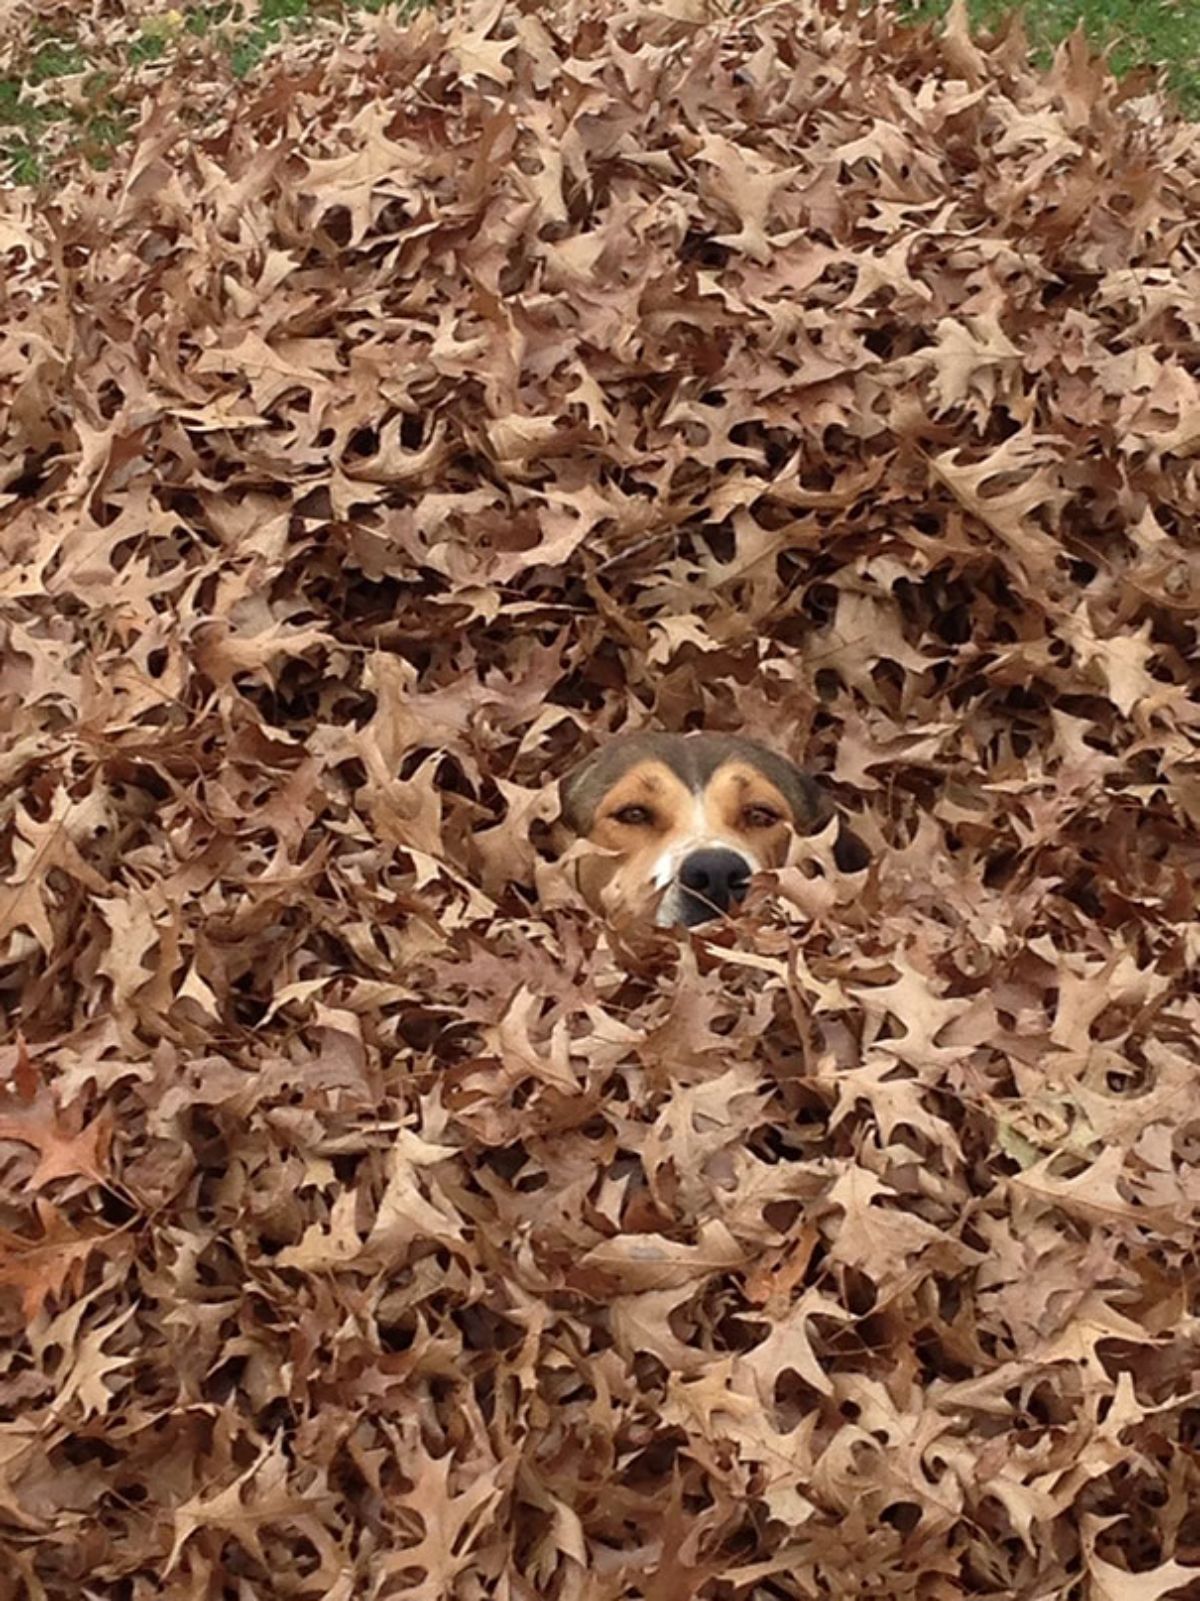 brown and white dog's face sticking out of a pile of brown dry leaves on the ground